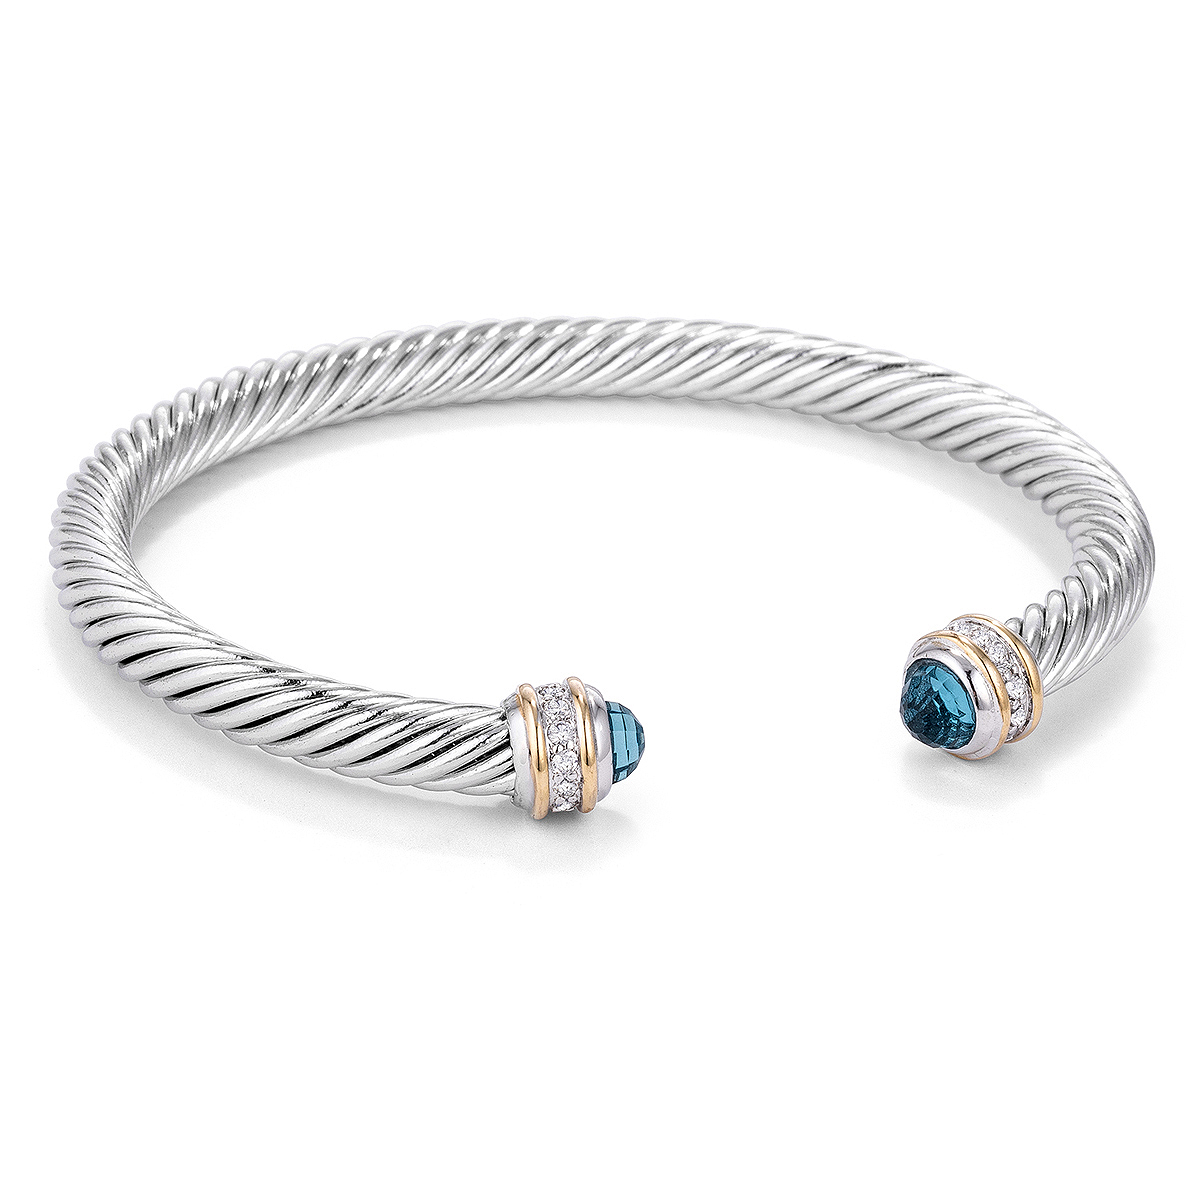 Silver Cable Bangle with Aqua Blue Crystal